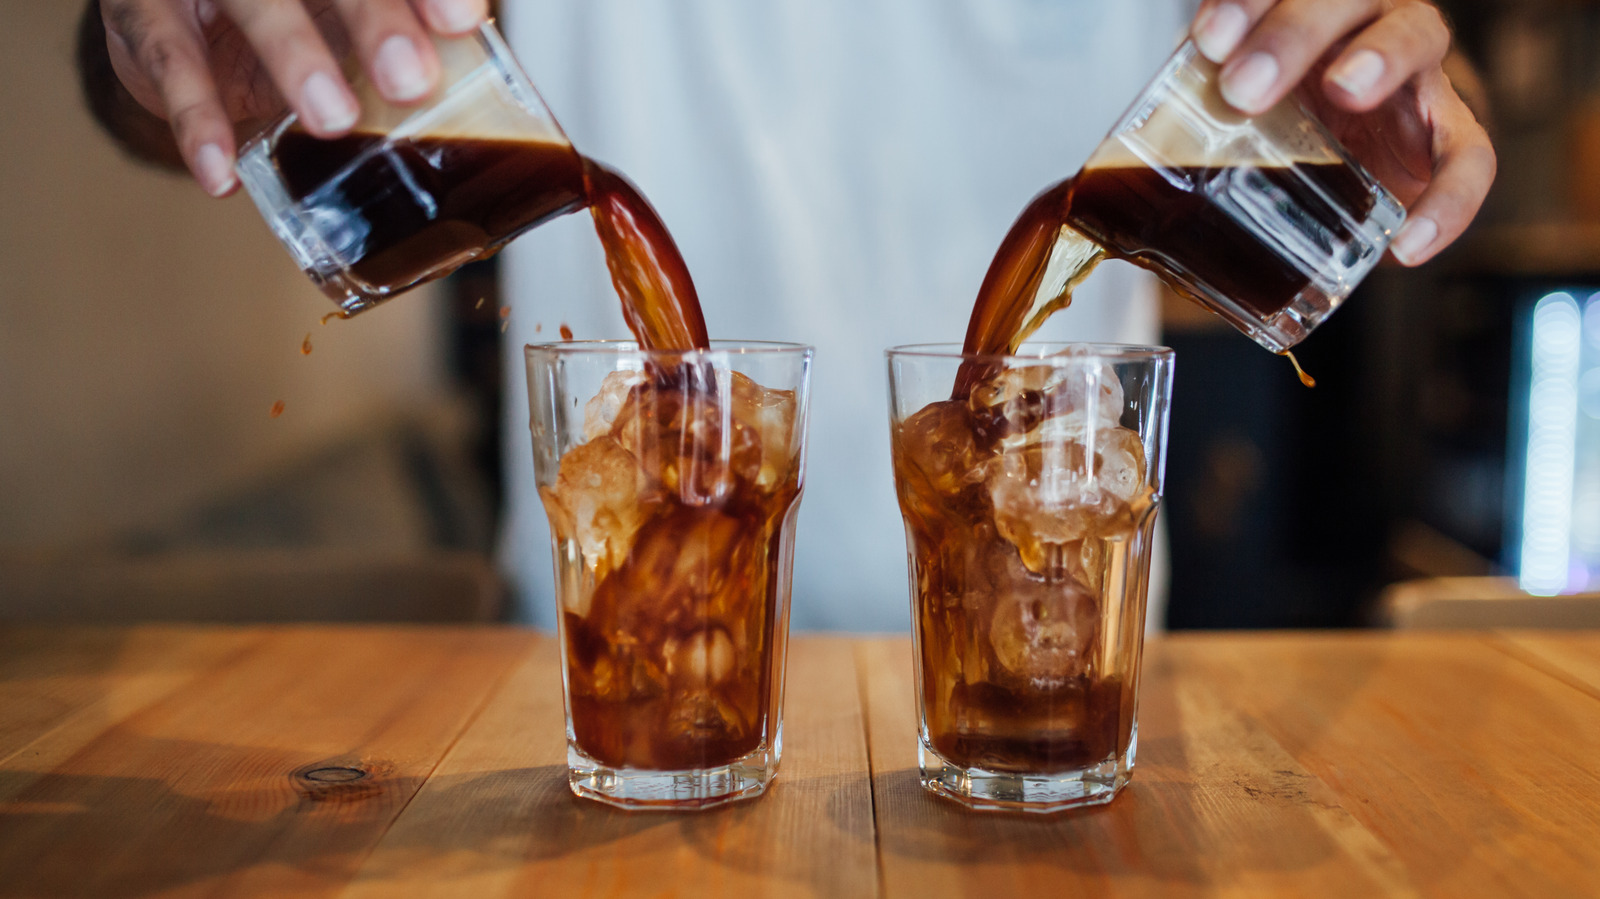 https://www.tastingtable.com/img/gallery/13-coffee-chains-with-the-best-cold-brew-ranked/l-intro-1694554786.jpg